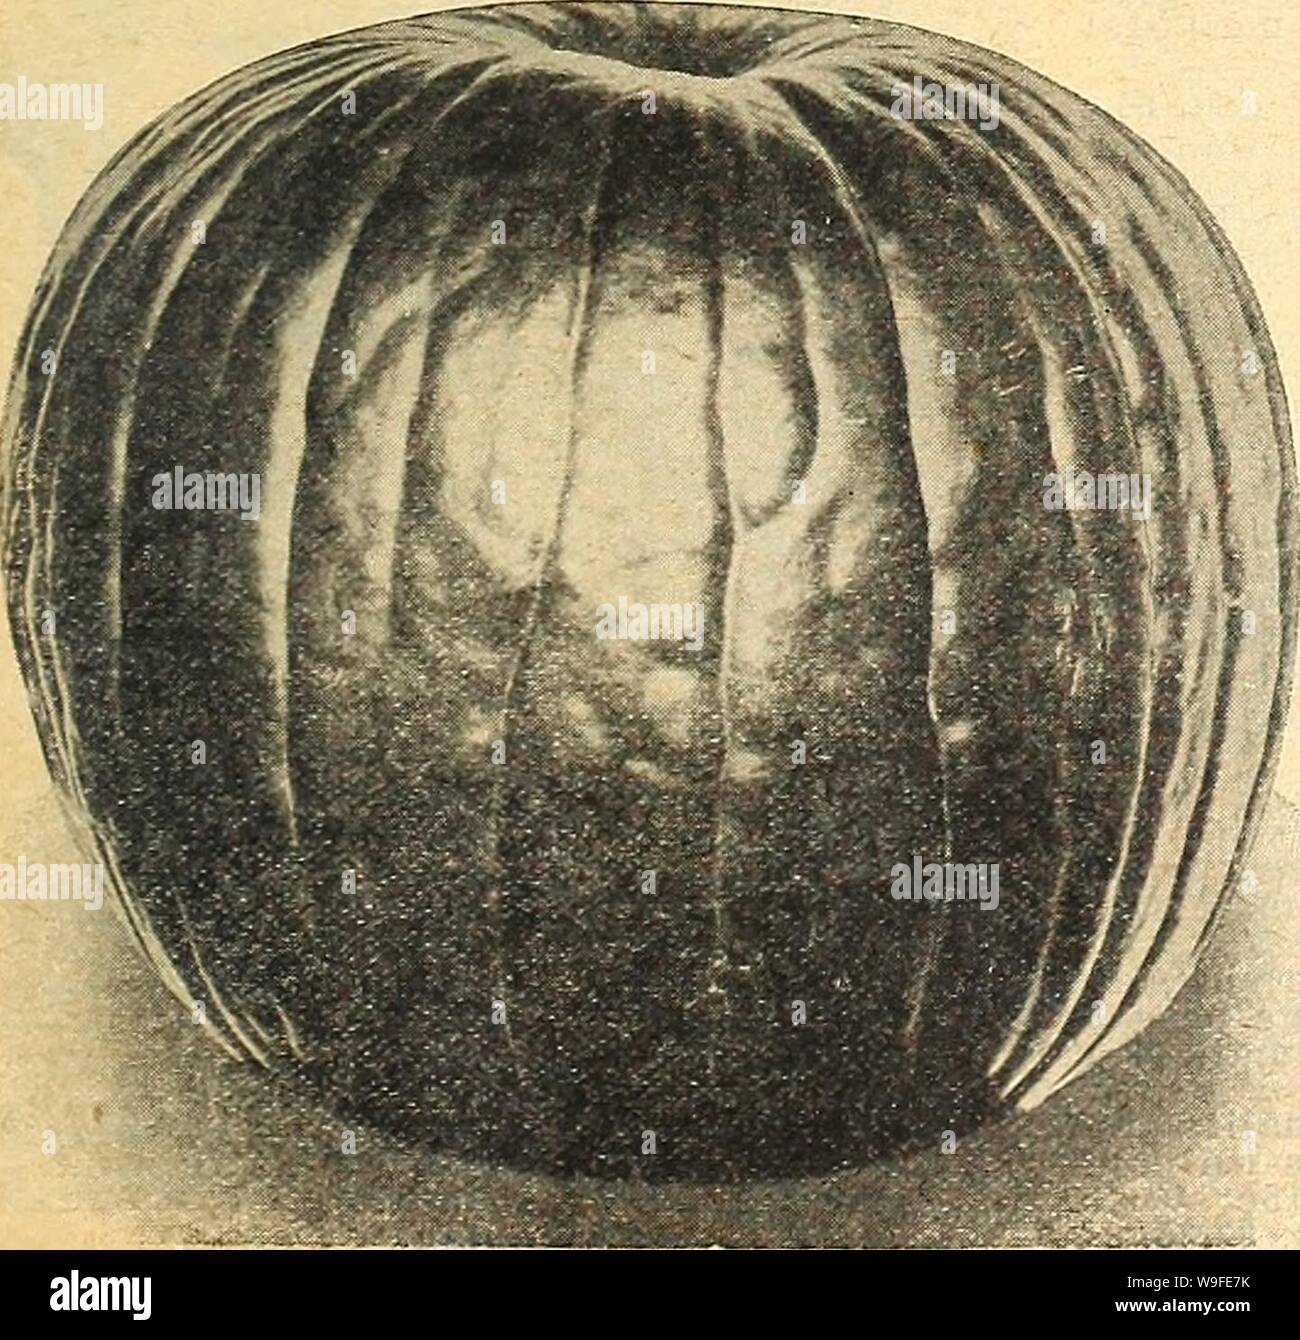 Archive image from page 34 of Currie's farm and garden annual. Currie's farm and garden annual : spring 1921 46th year  curriesfarmgarde19curr 4 Year: 1921 ( Chinese Giant Pepper. PUMPKIN 1 oz. to 30 to 50 bills. 3 to 4 lbs. per acre. Golden Dawn-—Similar in size and shape to Bull Nose, but a beautiful golden yellow. Pkt. 10c; V2 oz. 25c; 1 oz. 45c; V lb. $1.50. Chili Red—Largely used in the manufacture of pepper sauce; very prolific. Pkt. 10c;  oz. 25c; 1 oz. 45c; hi lb. $1.45.    Quaker Pie—Oval in shape, tapering to ends, creamy white. Pkt. 10c; oz. 20c;  lb. 50c; 1 lb. $1.70. Large Cheese, Stock Photo